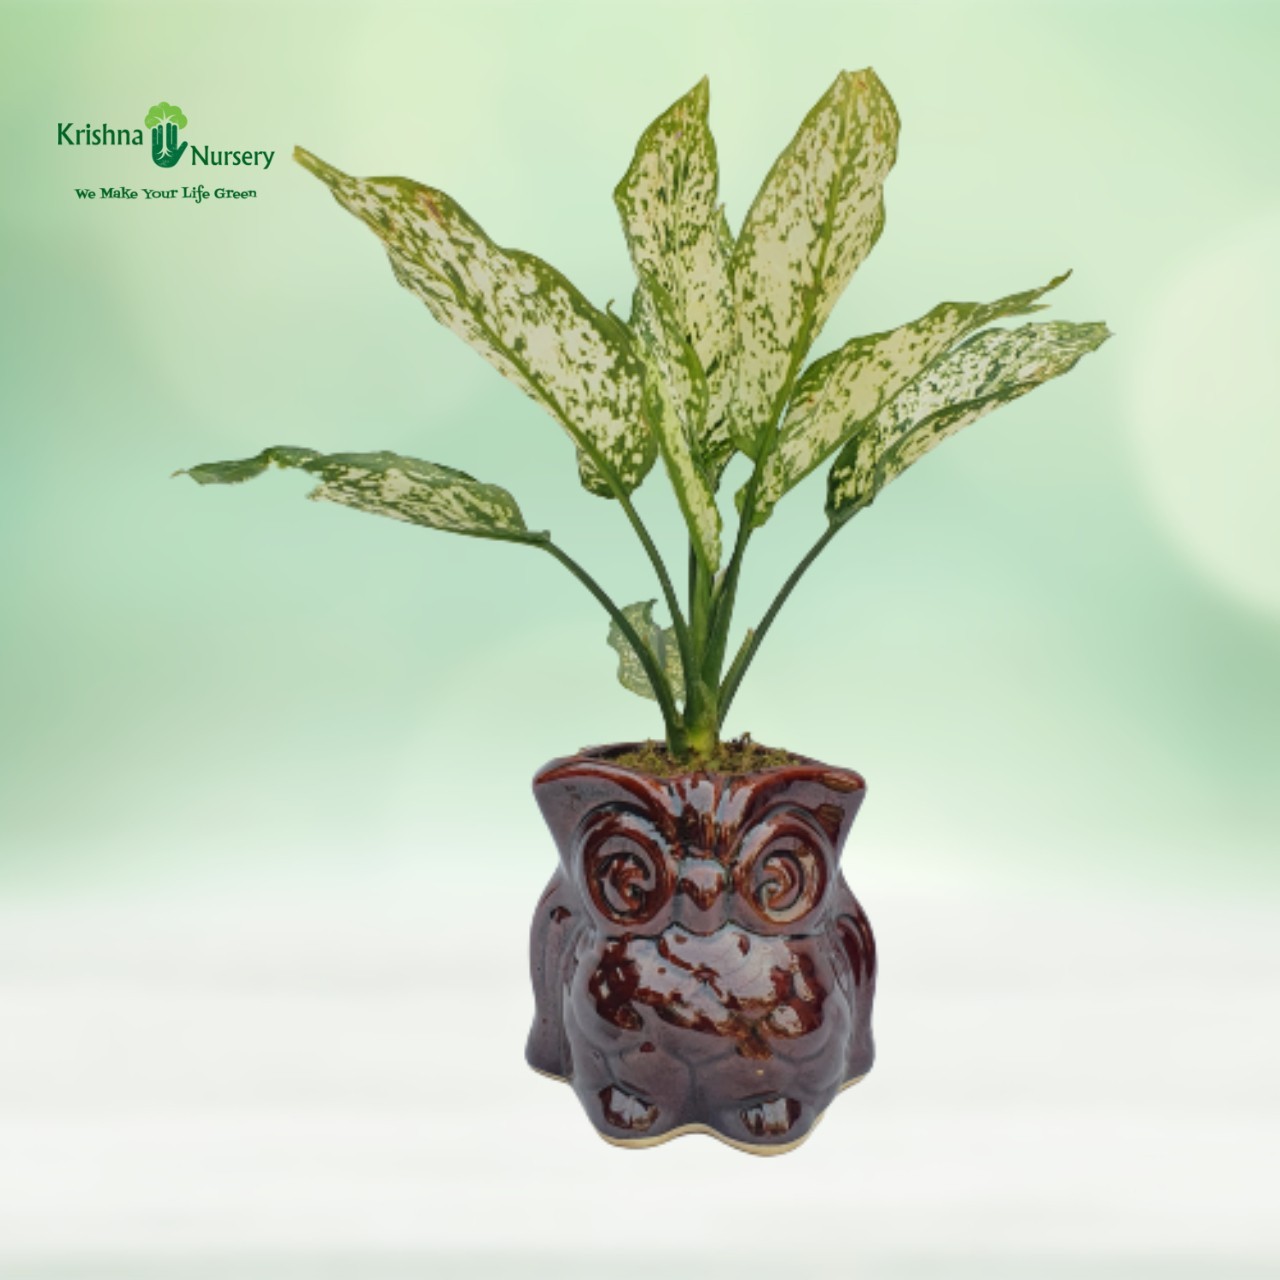 Aglaonema Snow White with Brown Pot - Gifting Plants -  - aglaonema-snow-white-with-brown-pot -   